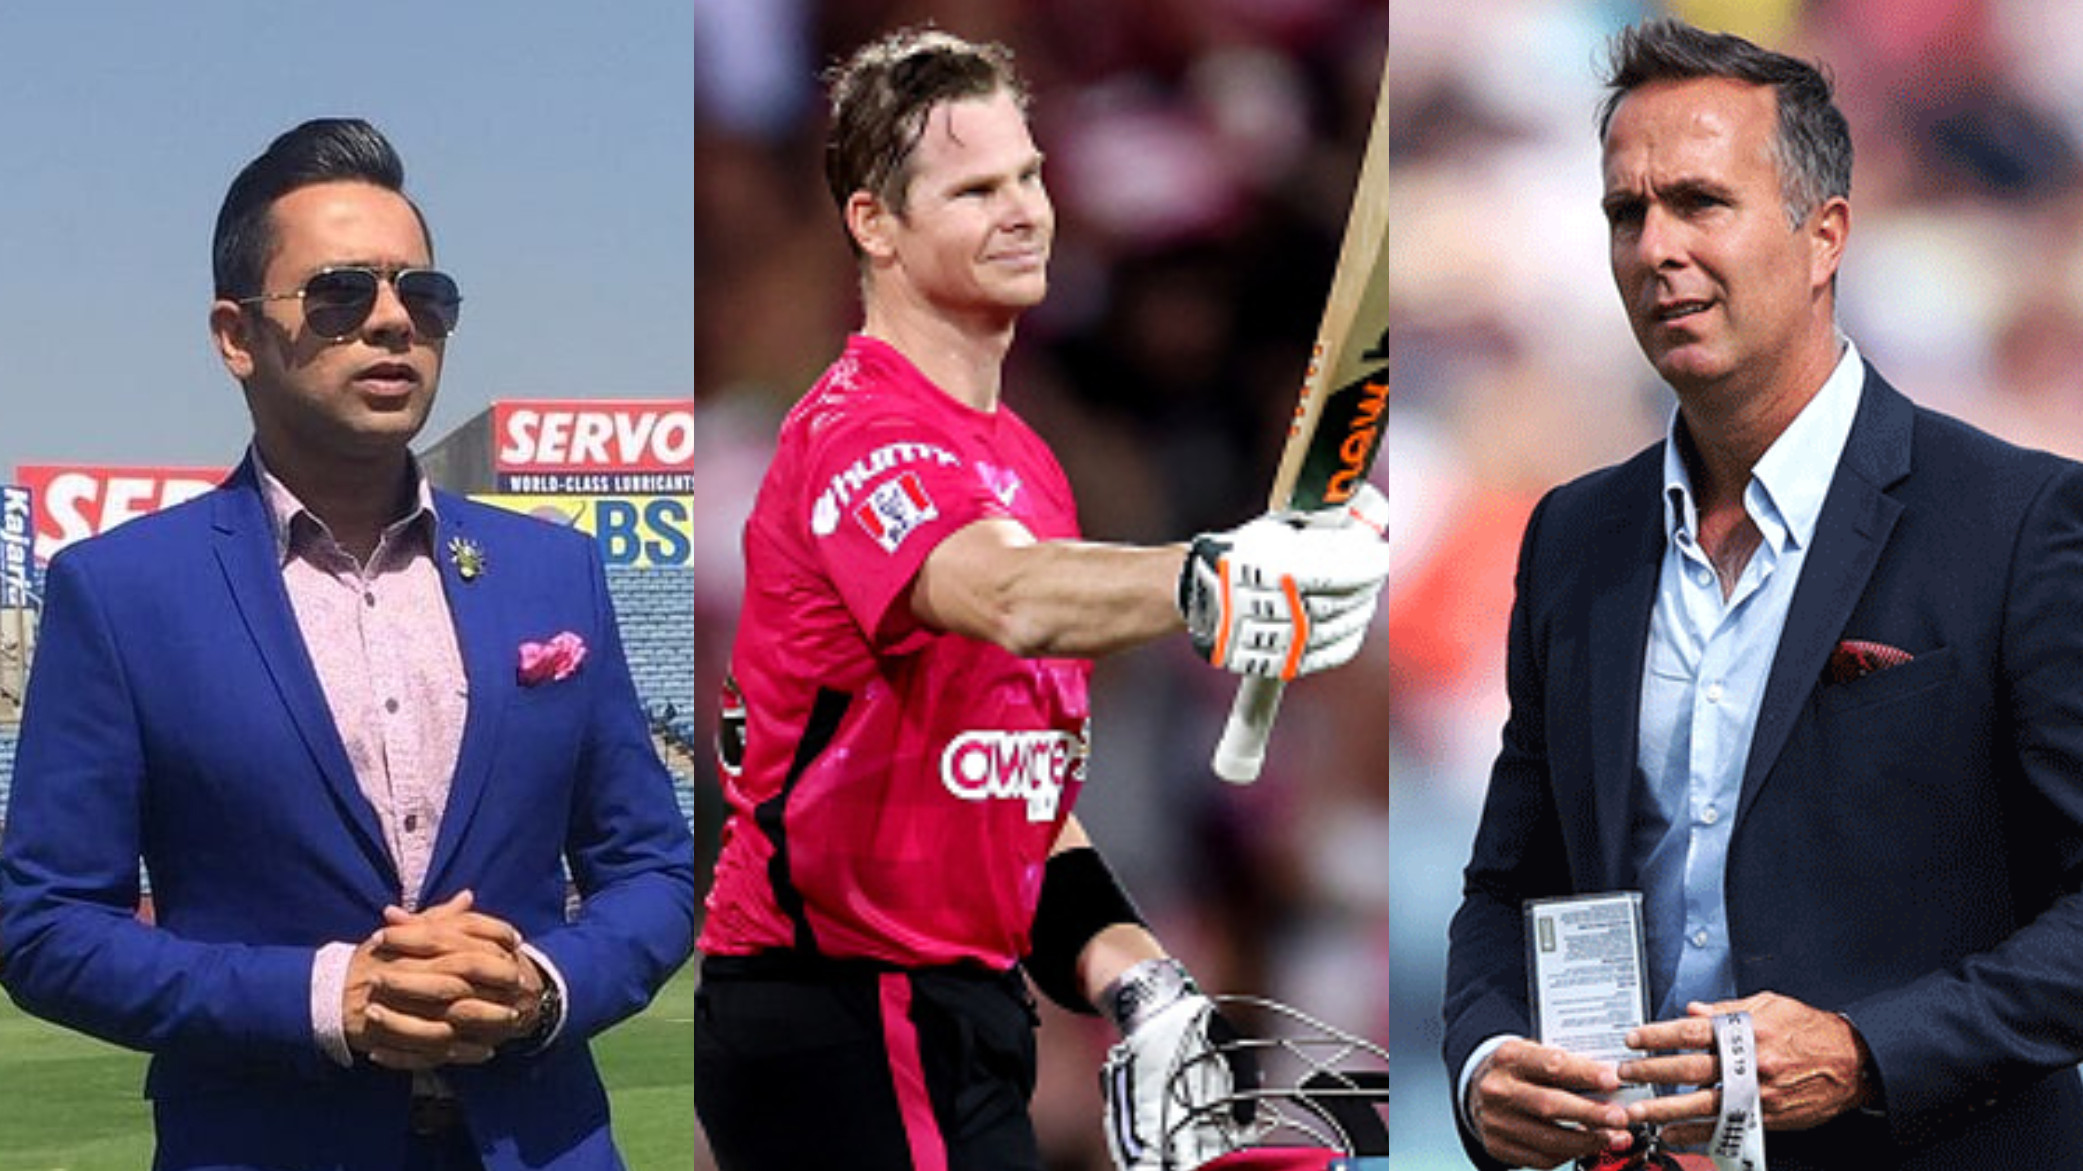 BBL 12: Cricket fraternity applauds Steve Smith after his consecutive centuries for Sydney Sixers, hits 125* vs Thunder